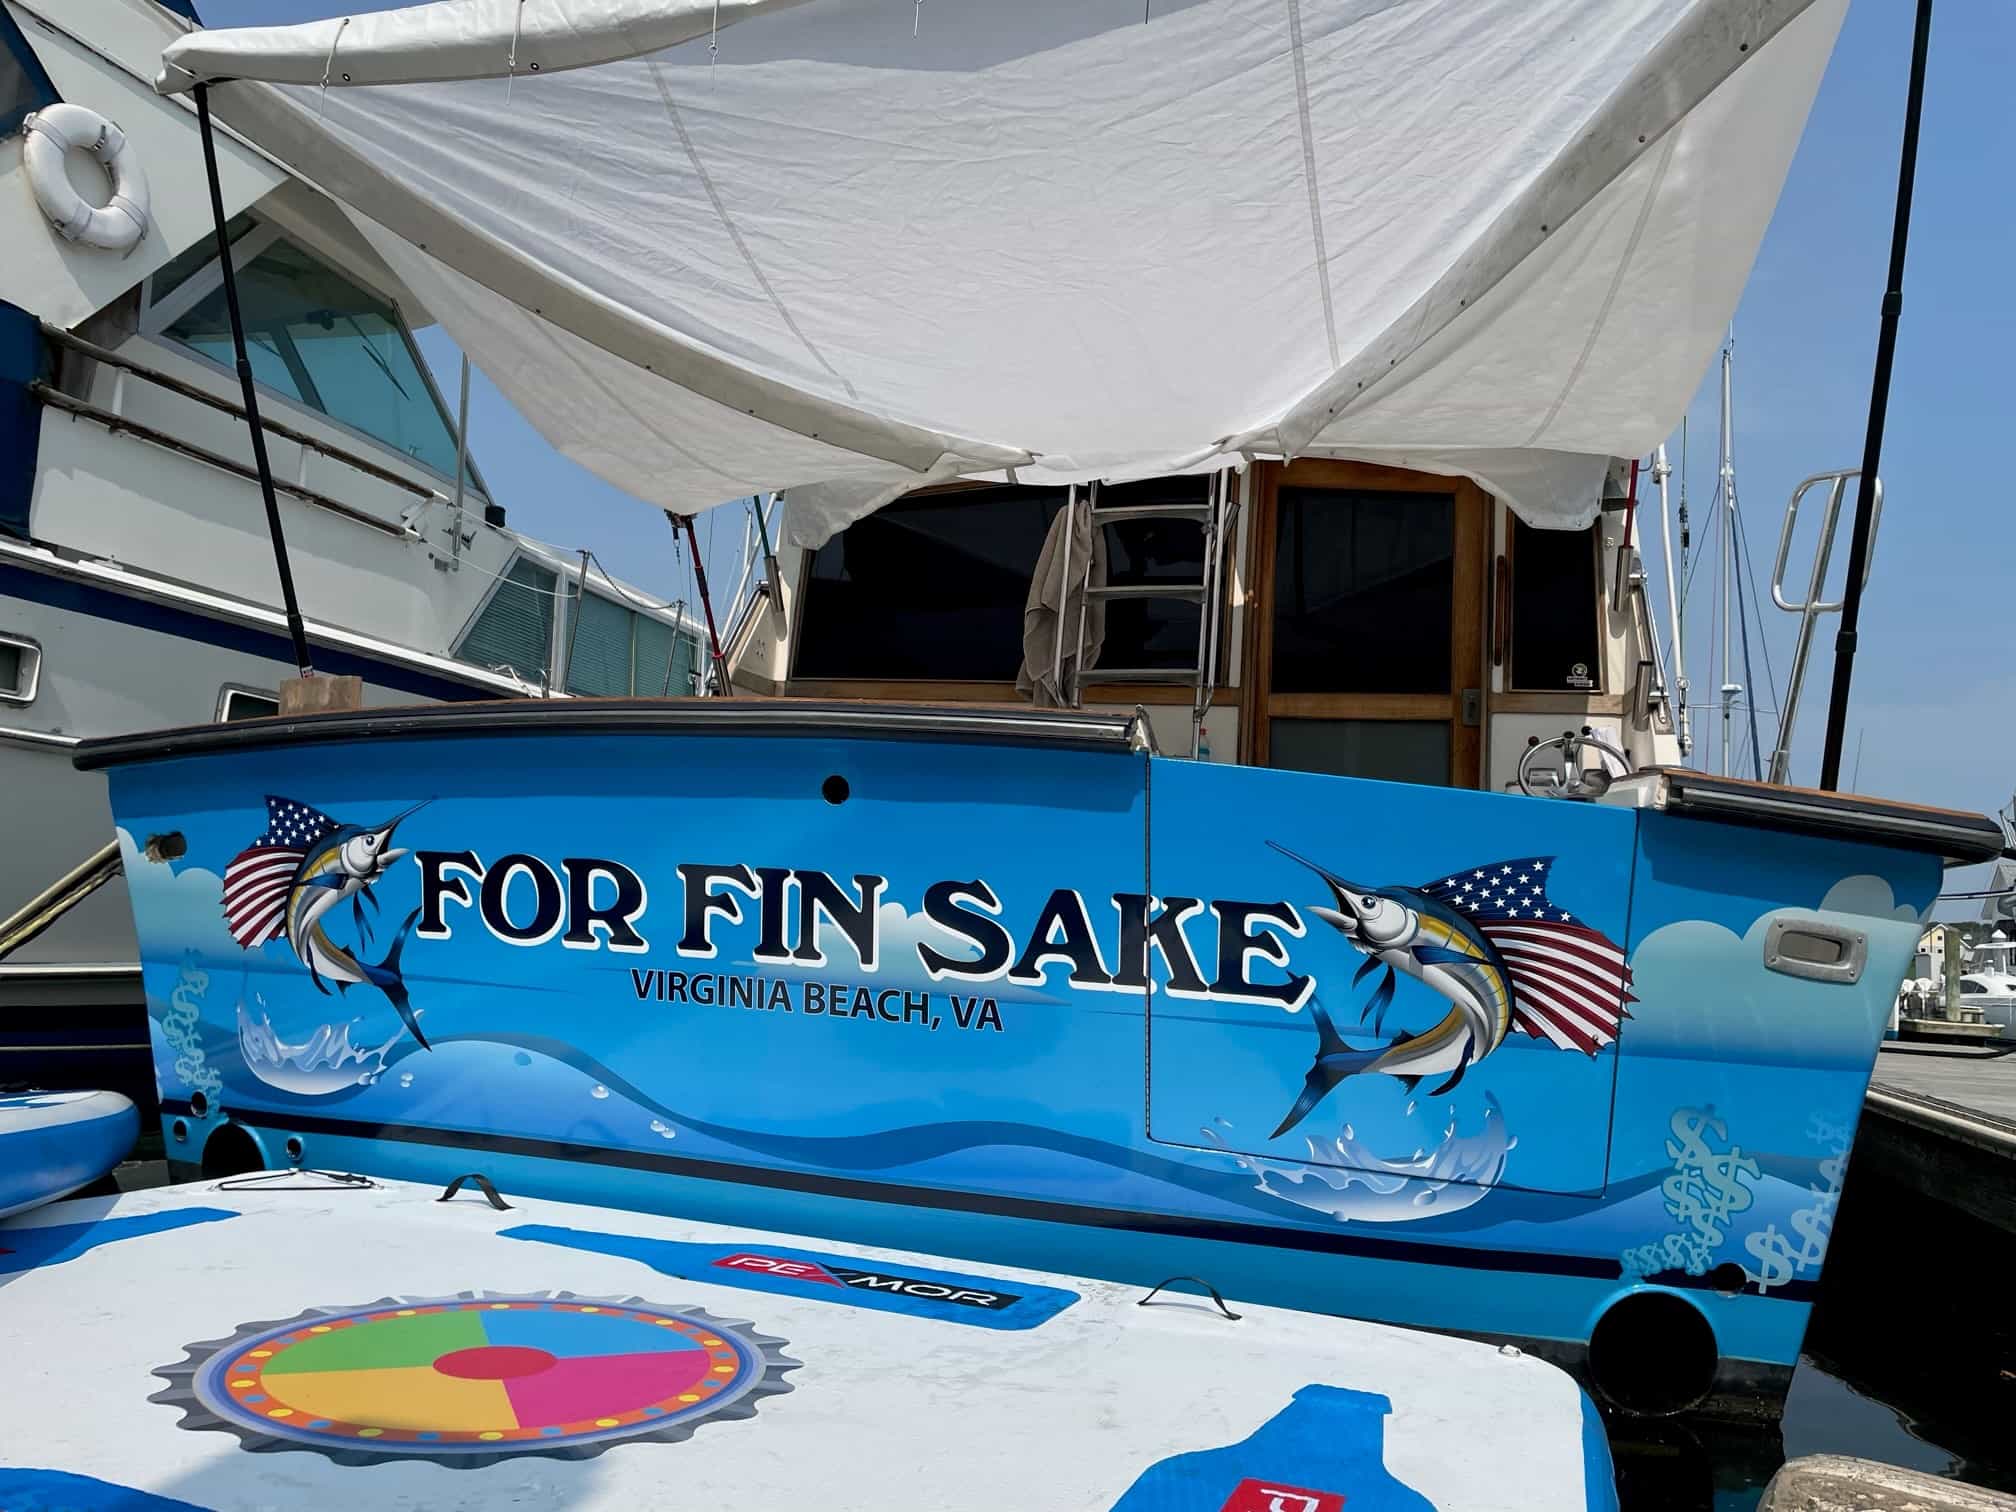 Boat wrap and lettering on stern - Lettering 'FOR FIN SAKE' and Marlin boat graphics